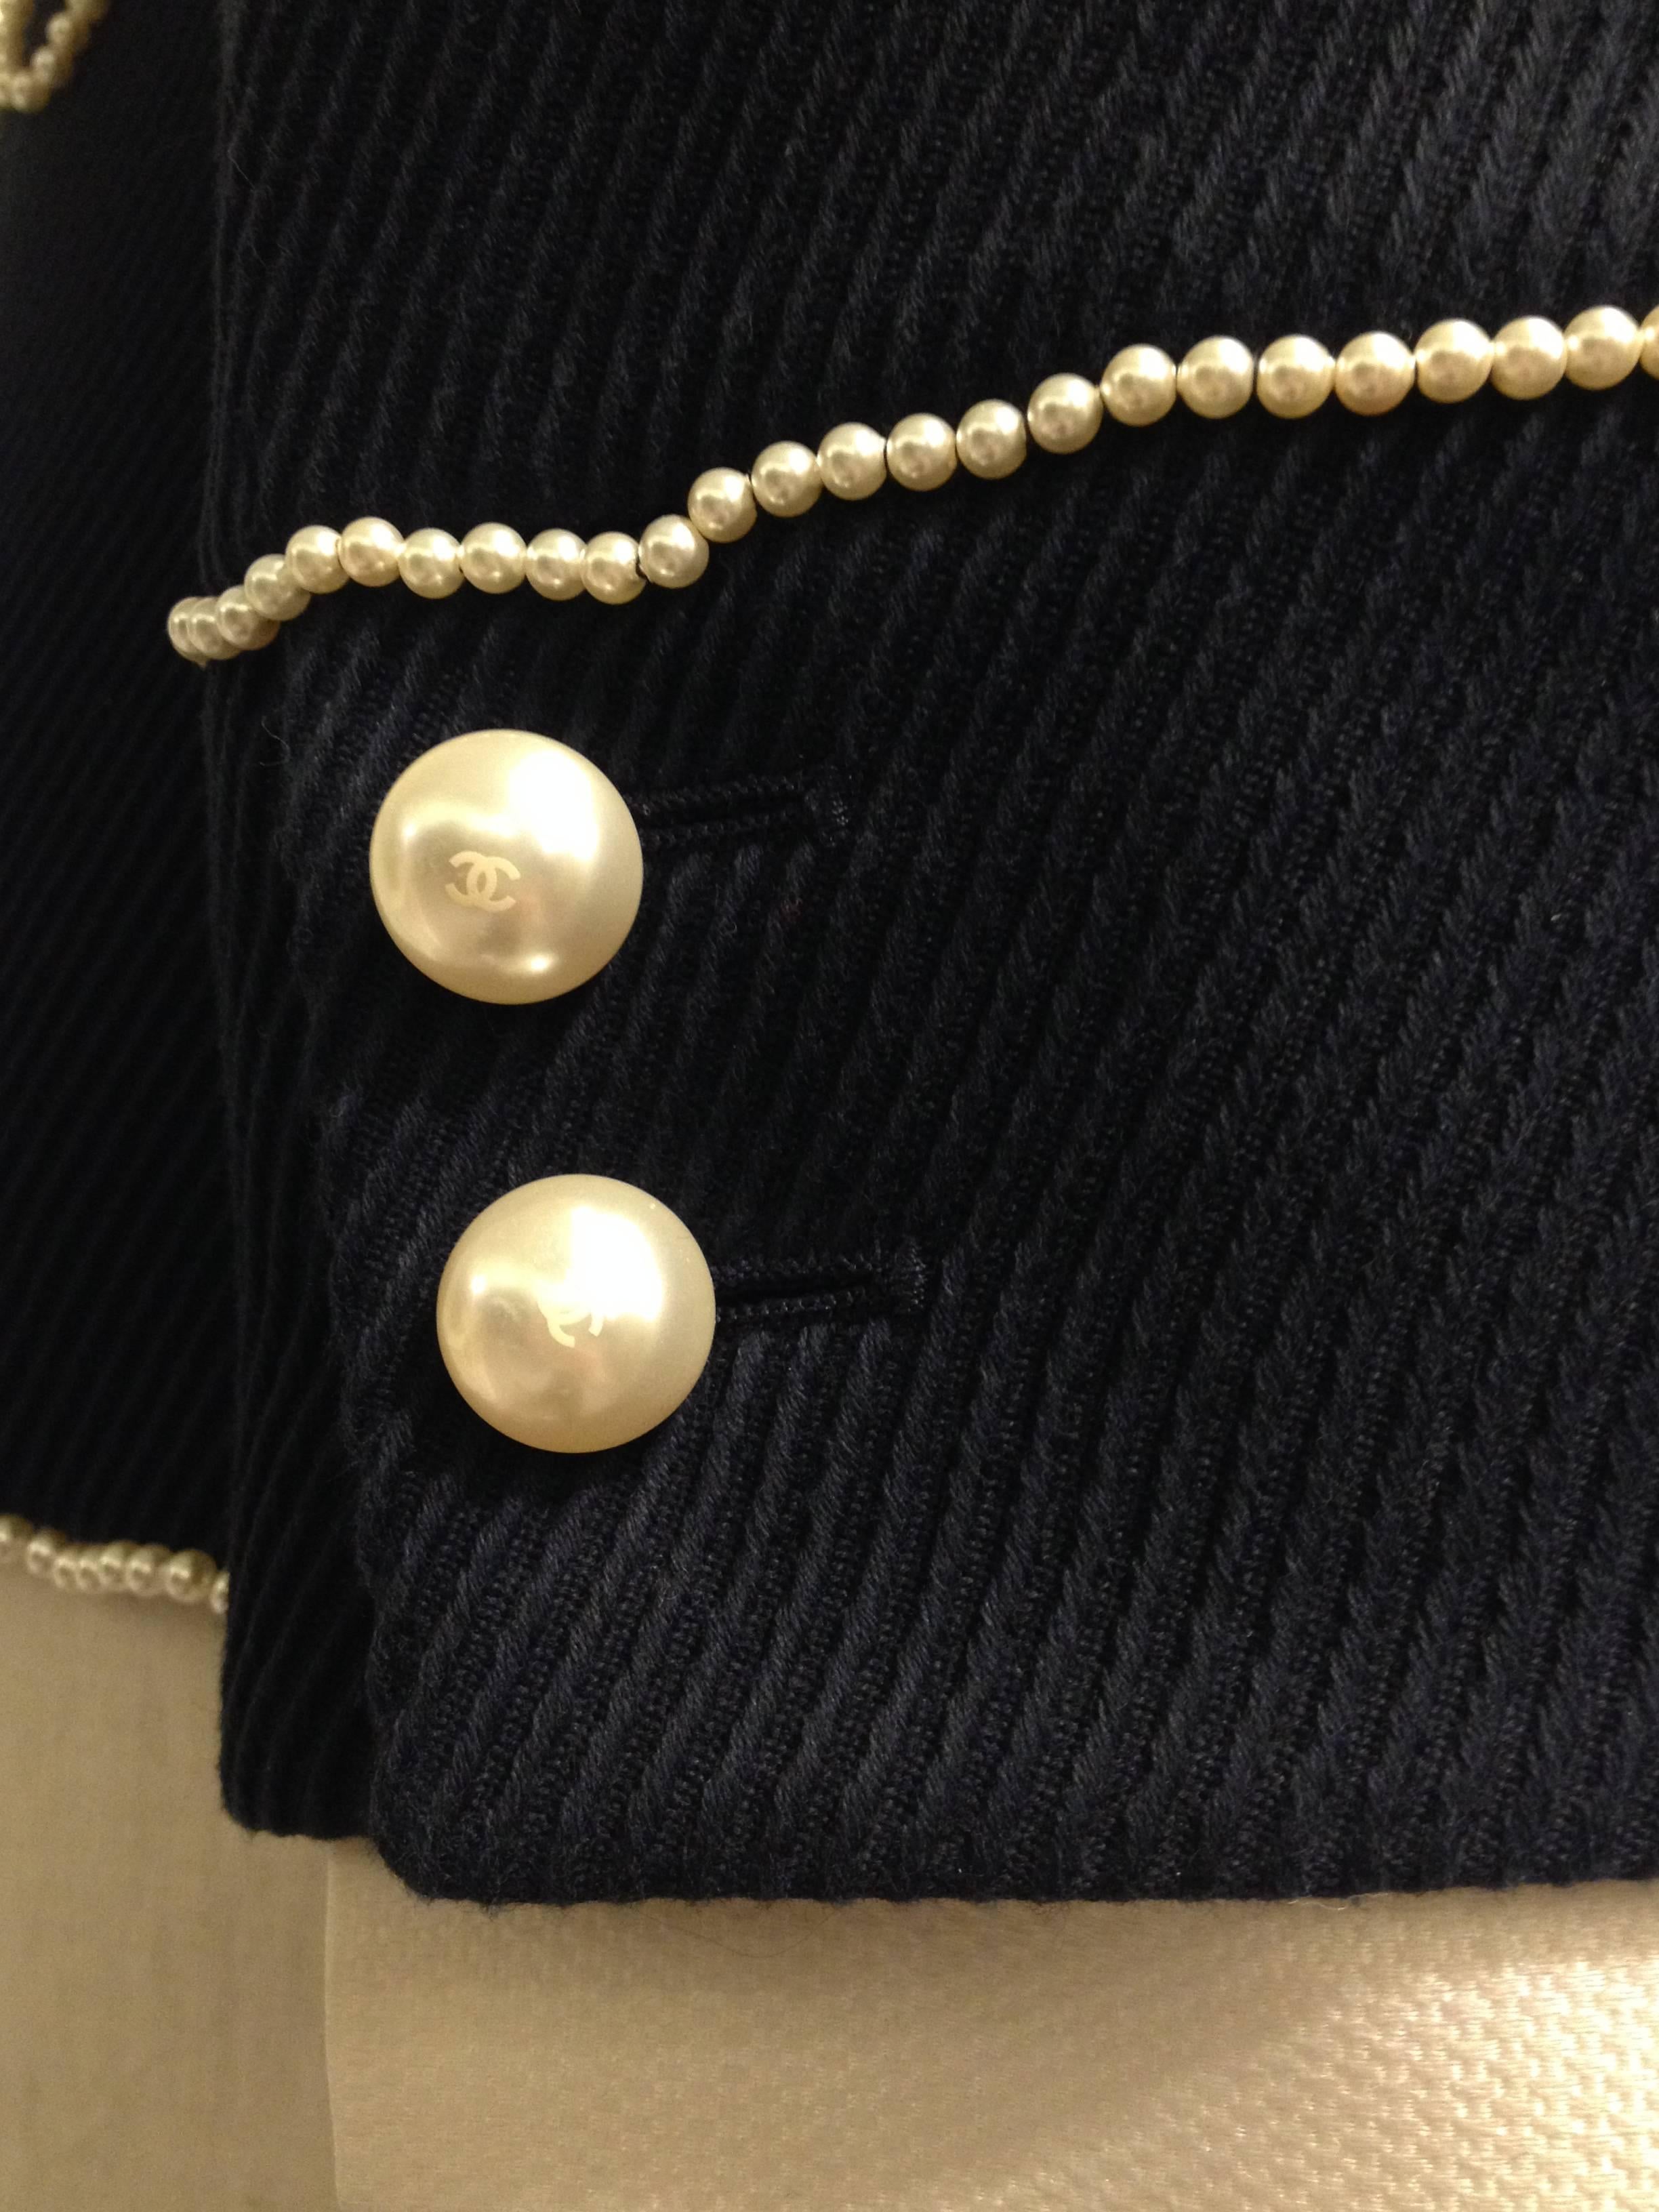 Chanel Navy Majorette Jacket with Pearls 2